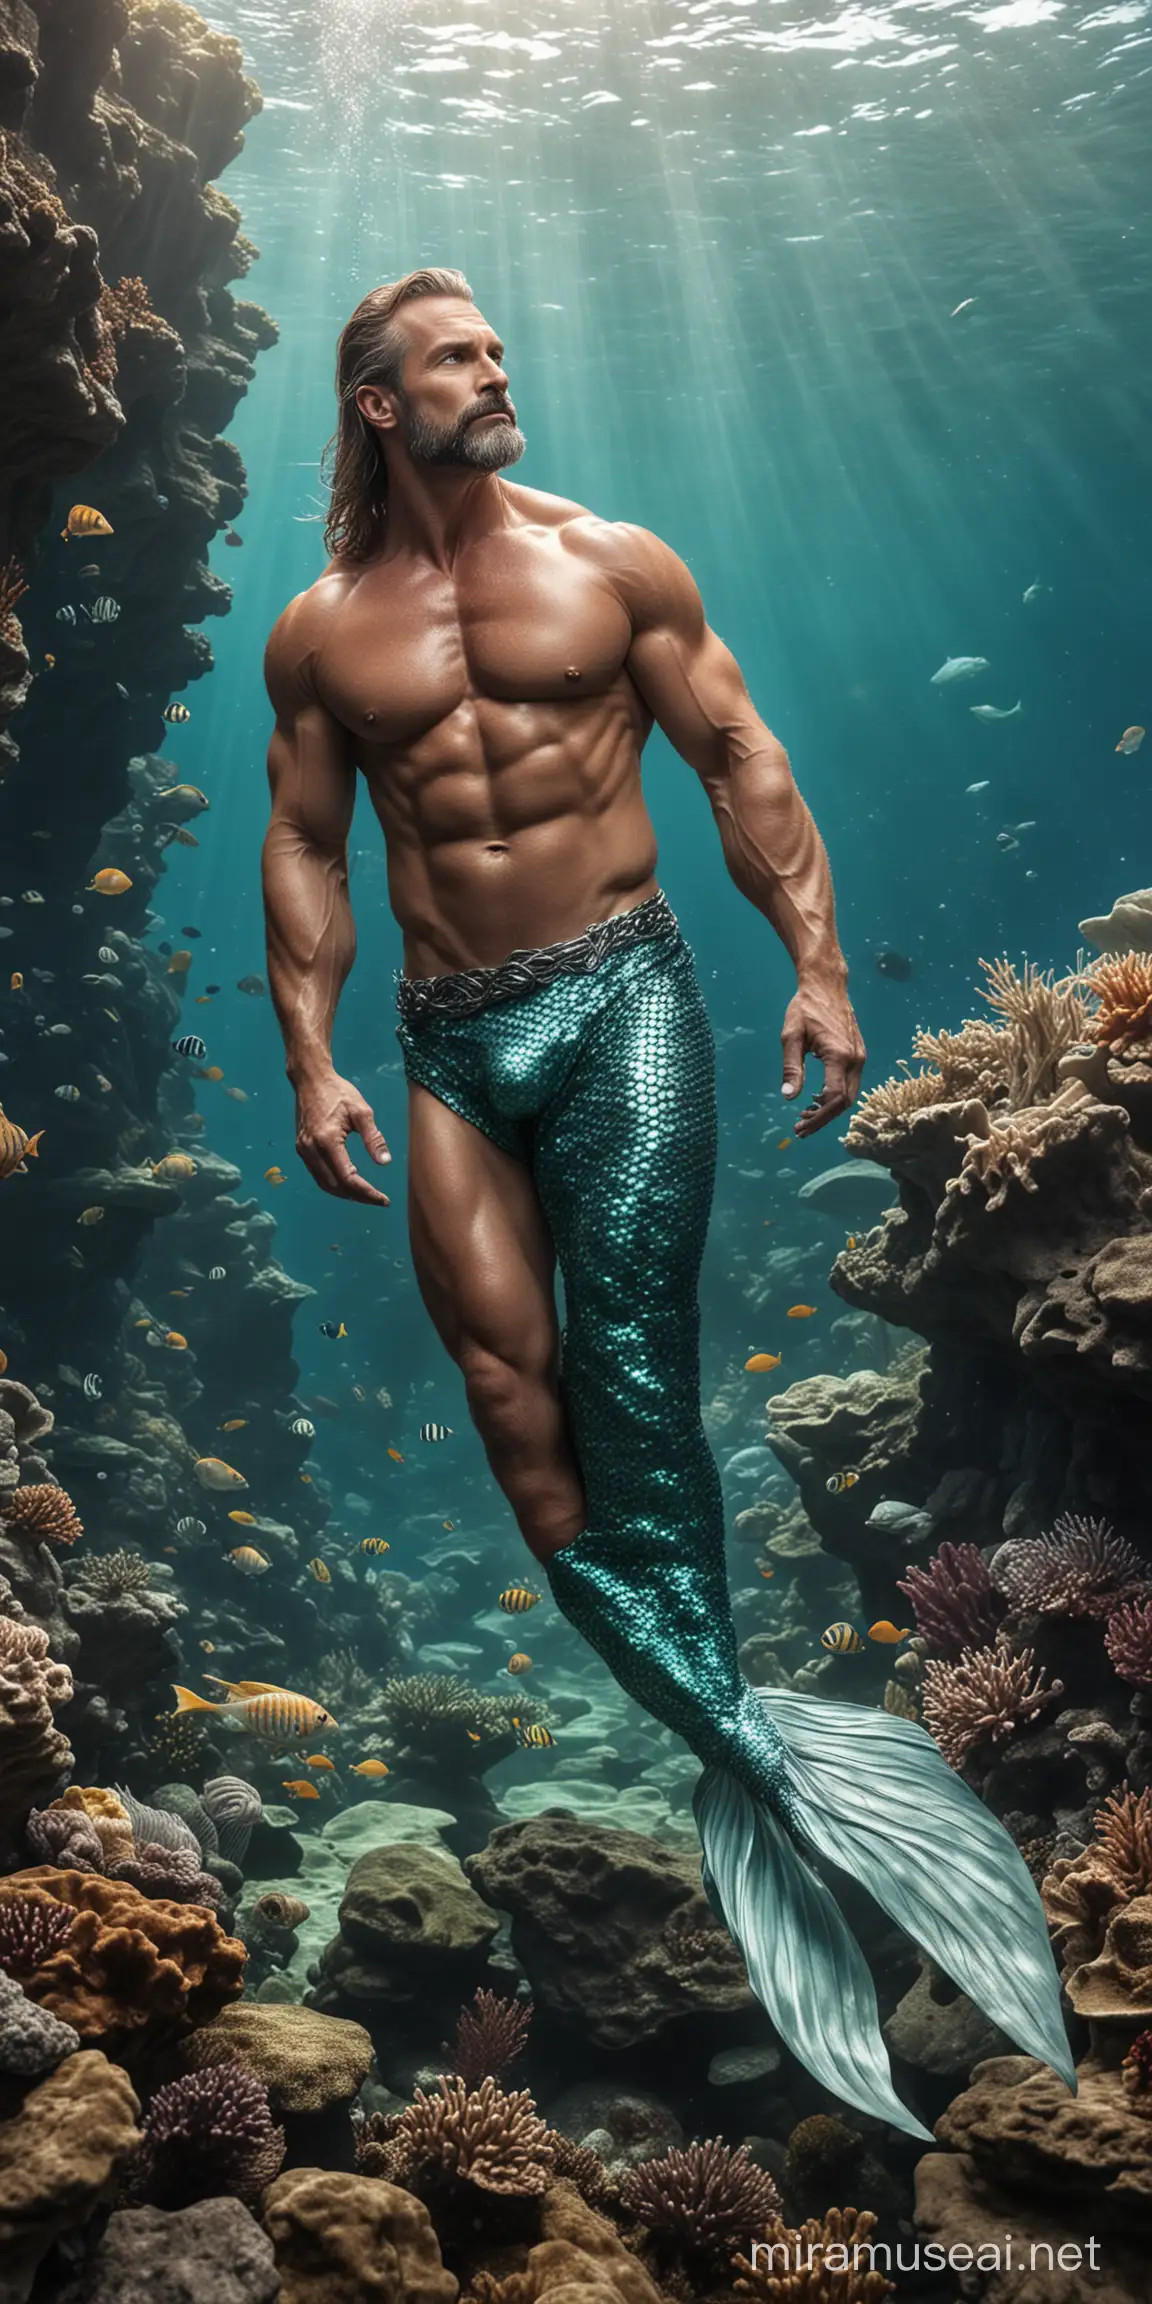 Mature muscular male mermaid on a rock under the sea with sealife